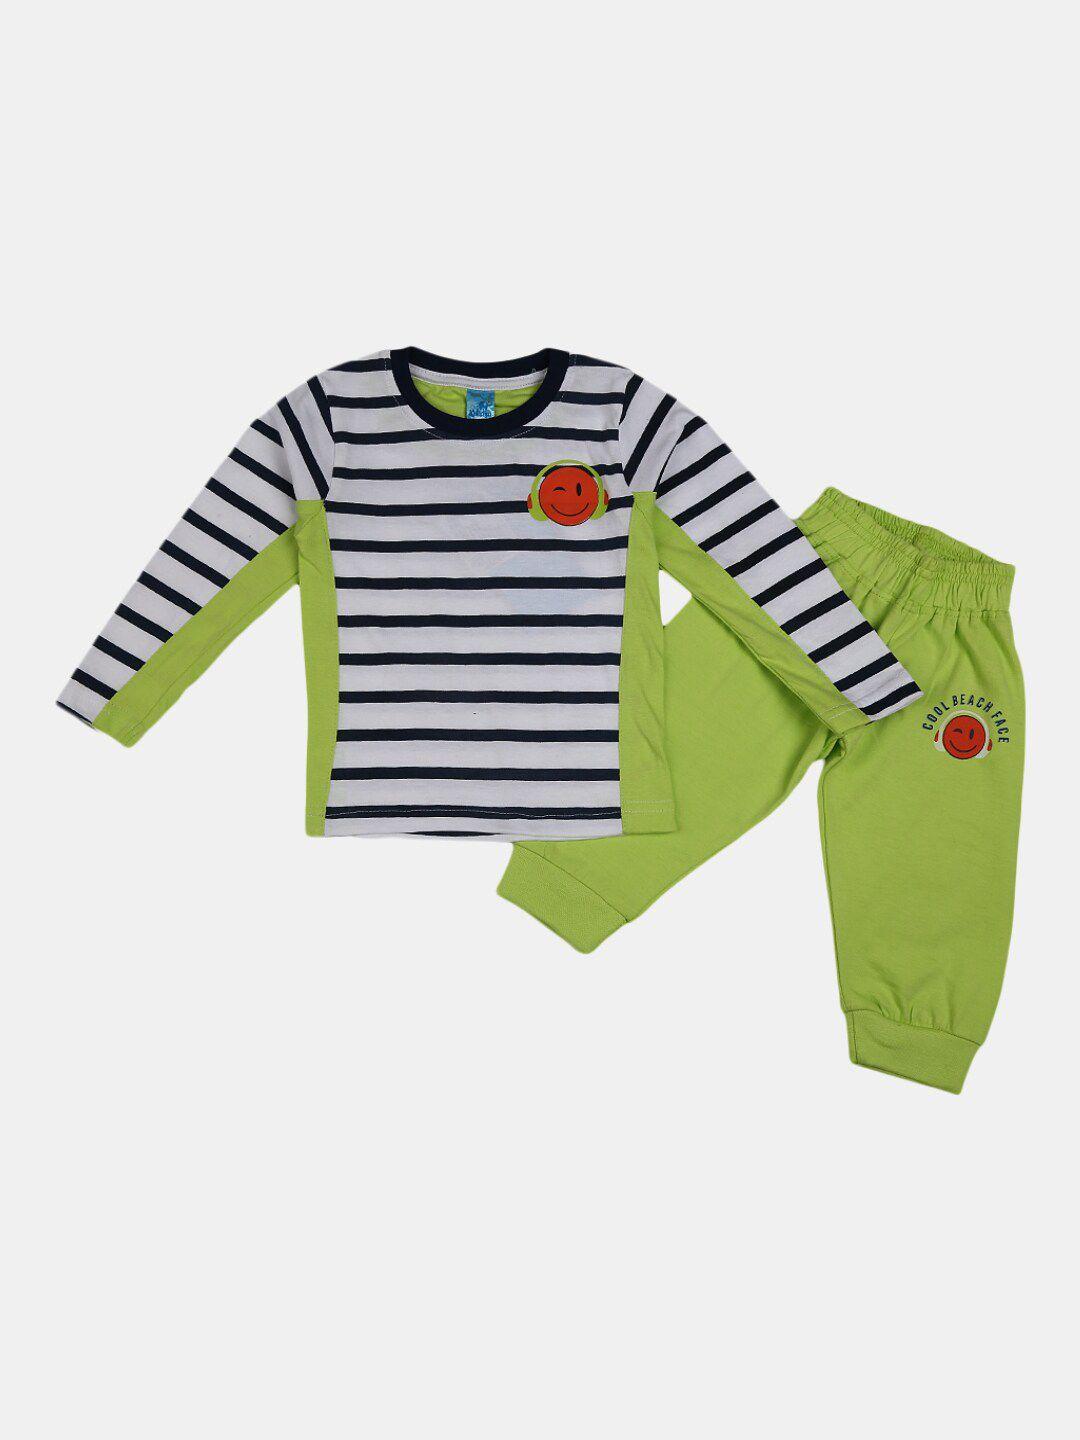 v-mart kids white & green striped t-shirt with trousers